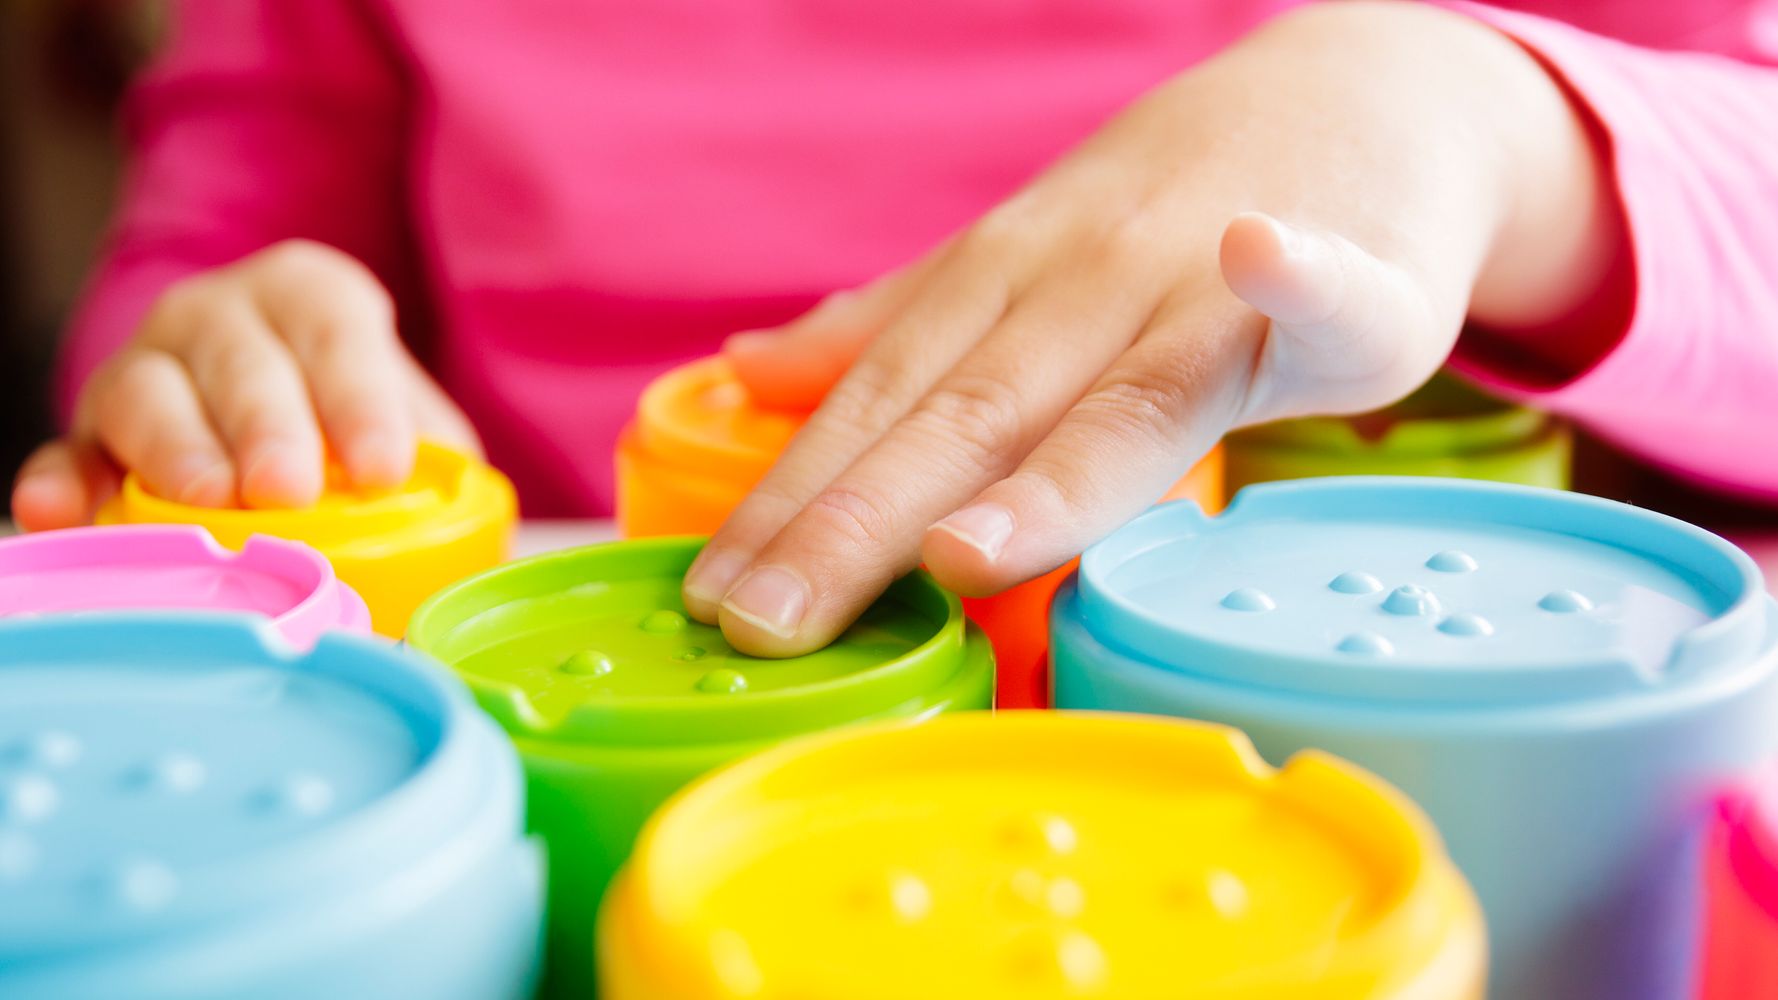 15 Brilliant Toys For Autistic Children To Play And Learn